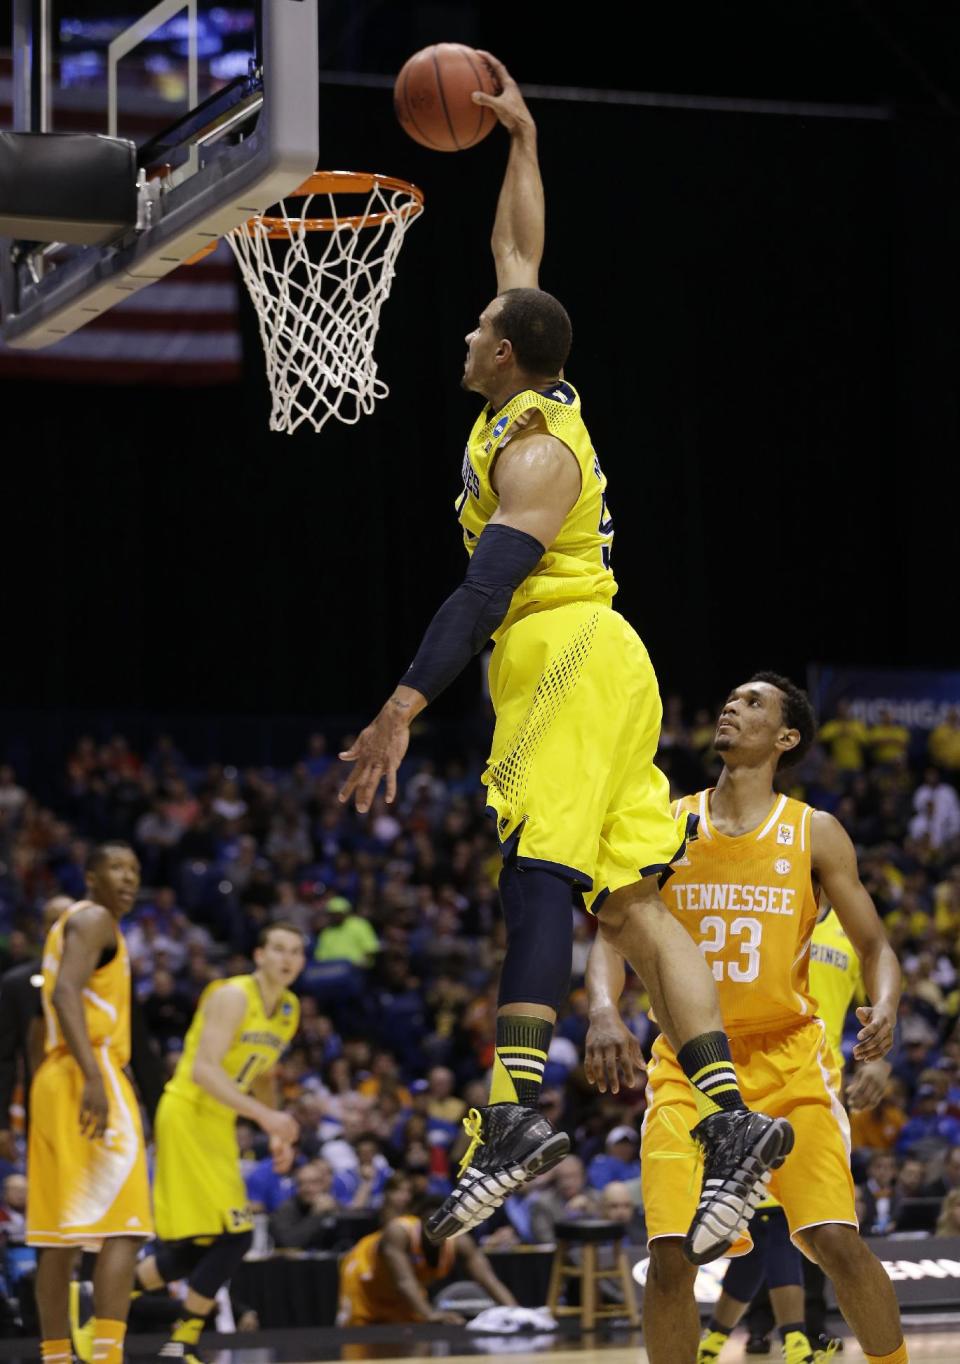 Michigan's Jordan Morgan goes up for a dunk during the first half of an NCAA Midwest Regional semifinal college basketball tournament game against the Tennessee Friday, March 28, 2014, in Indianapolis. (AP Photo/David J. Phillip)